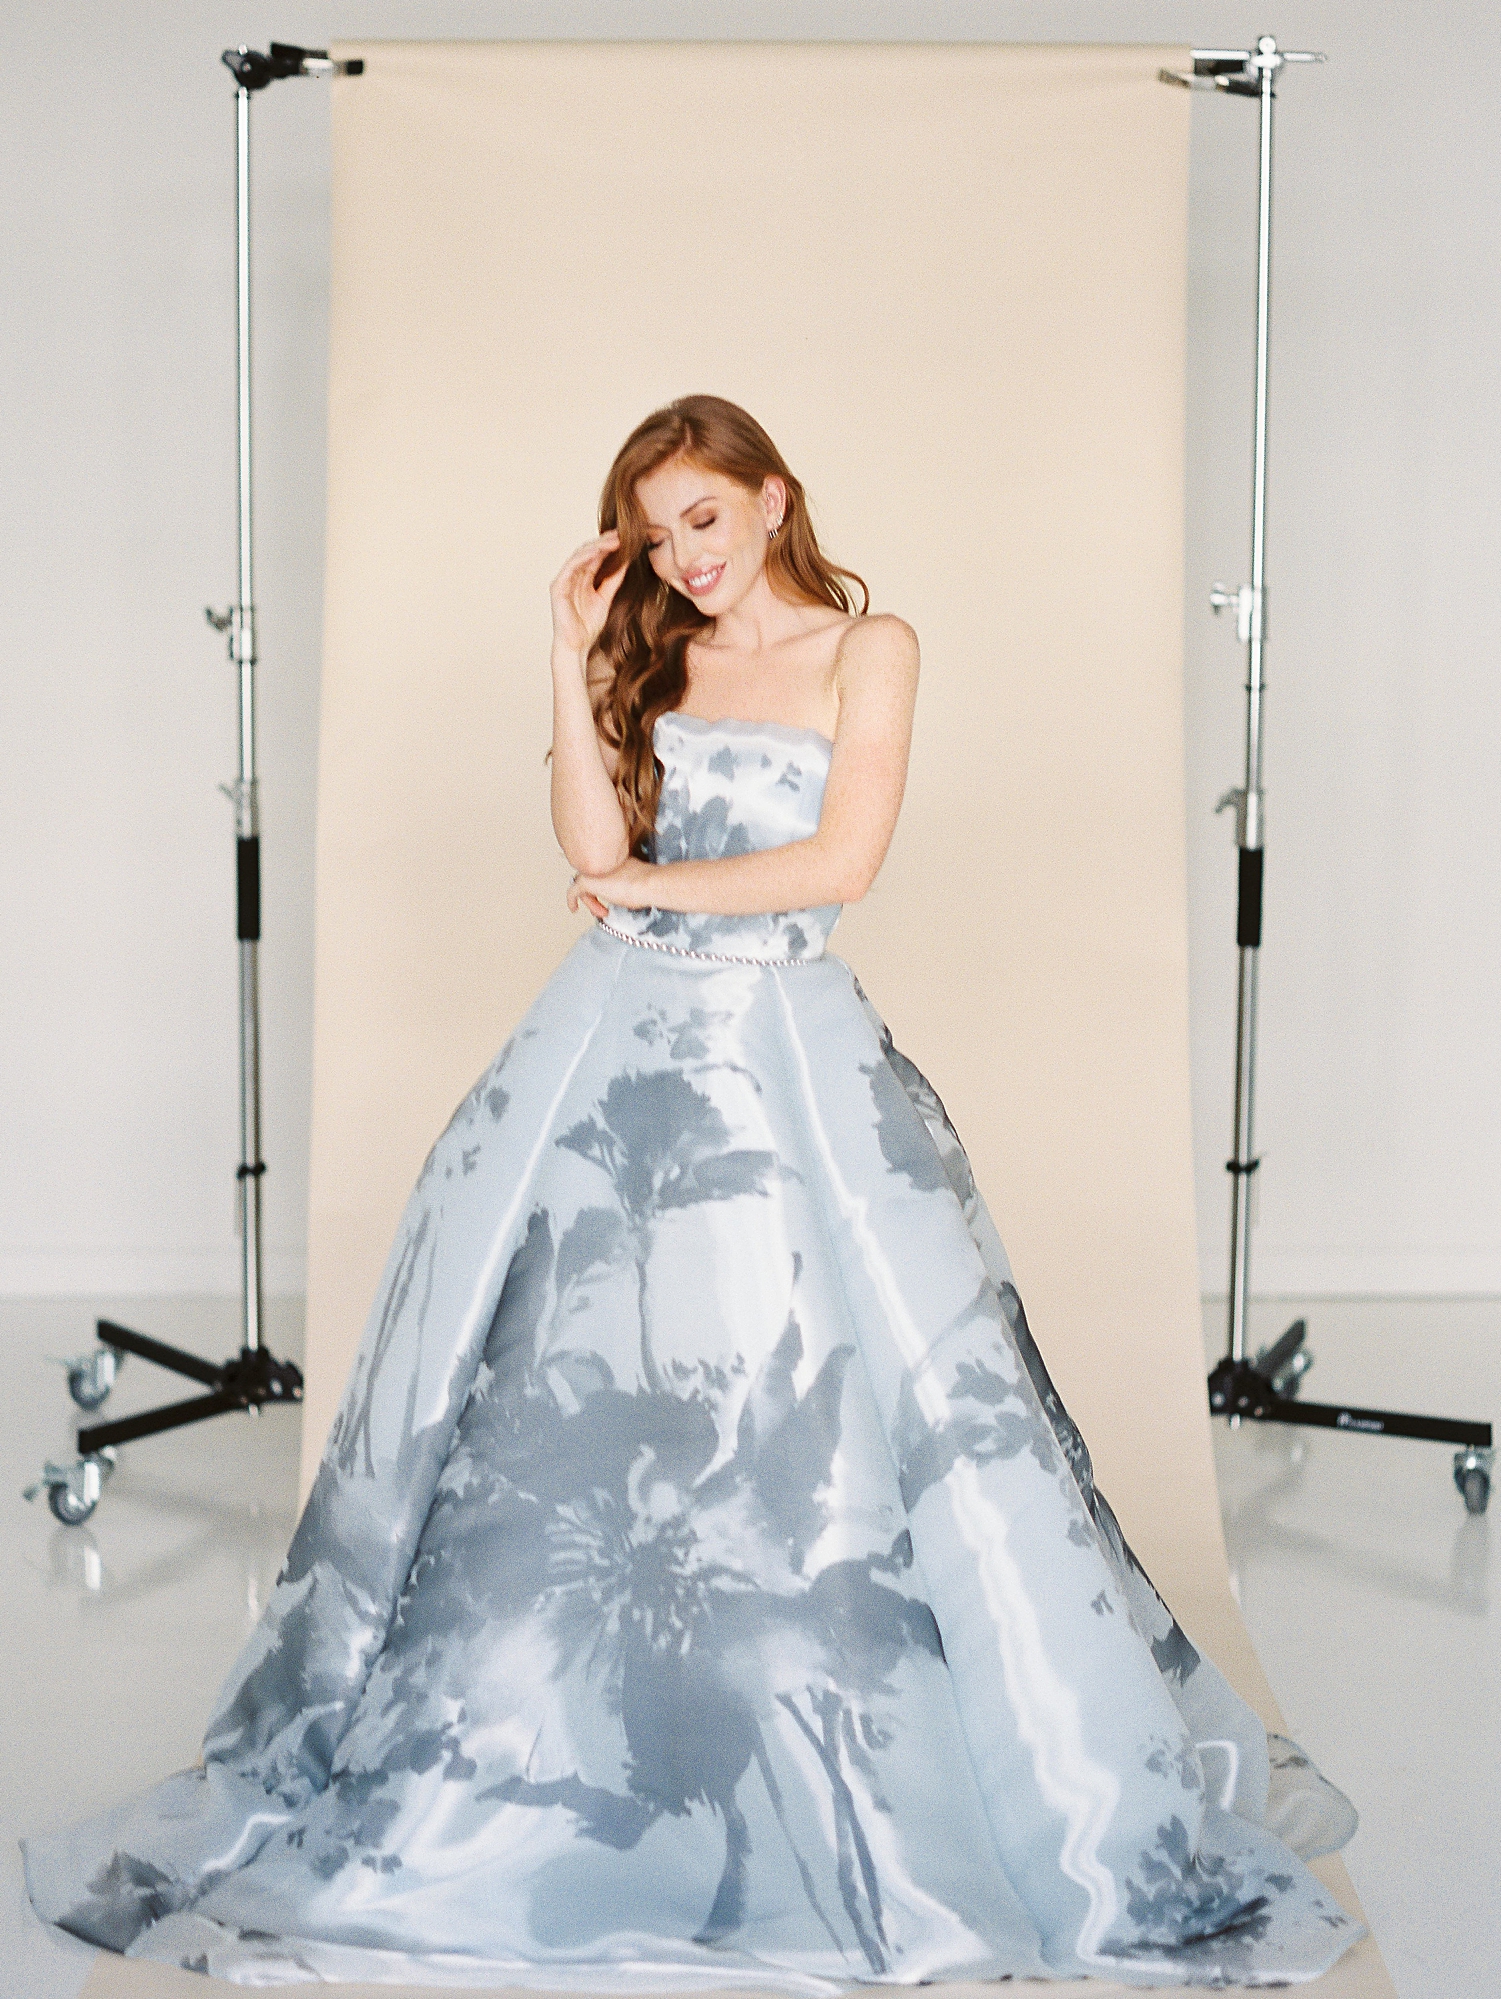 Blue floral ball gown worn by redhead girl